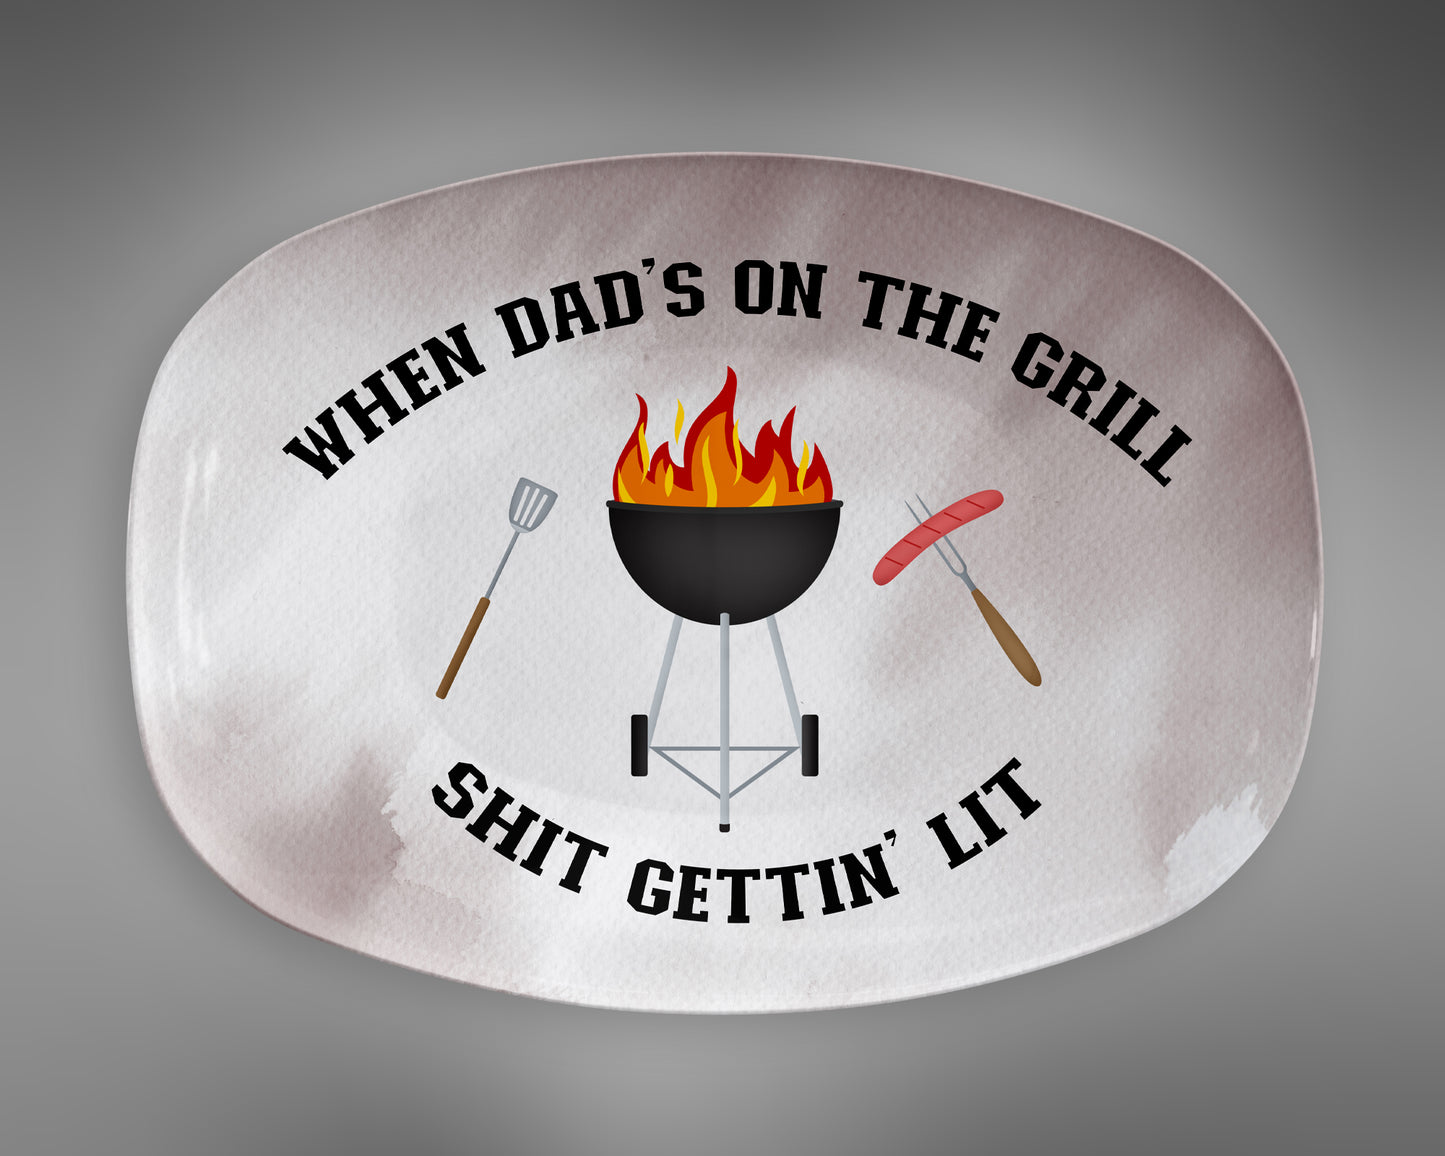 "When Dad's On The Grill Sh*t Getting Lit" Grill Platter